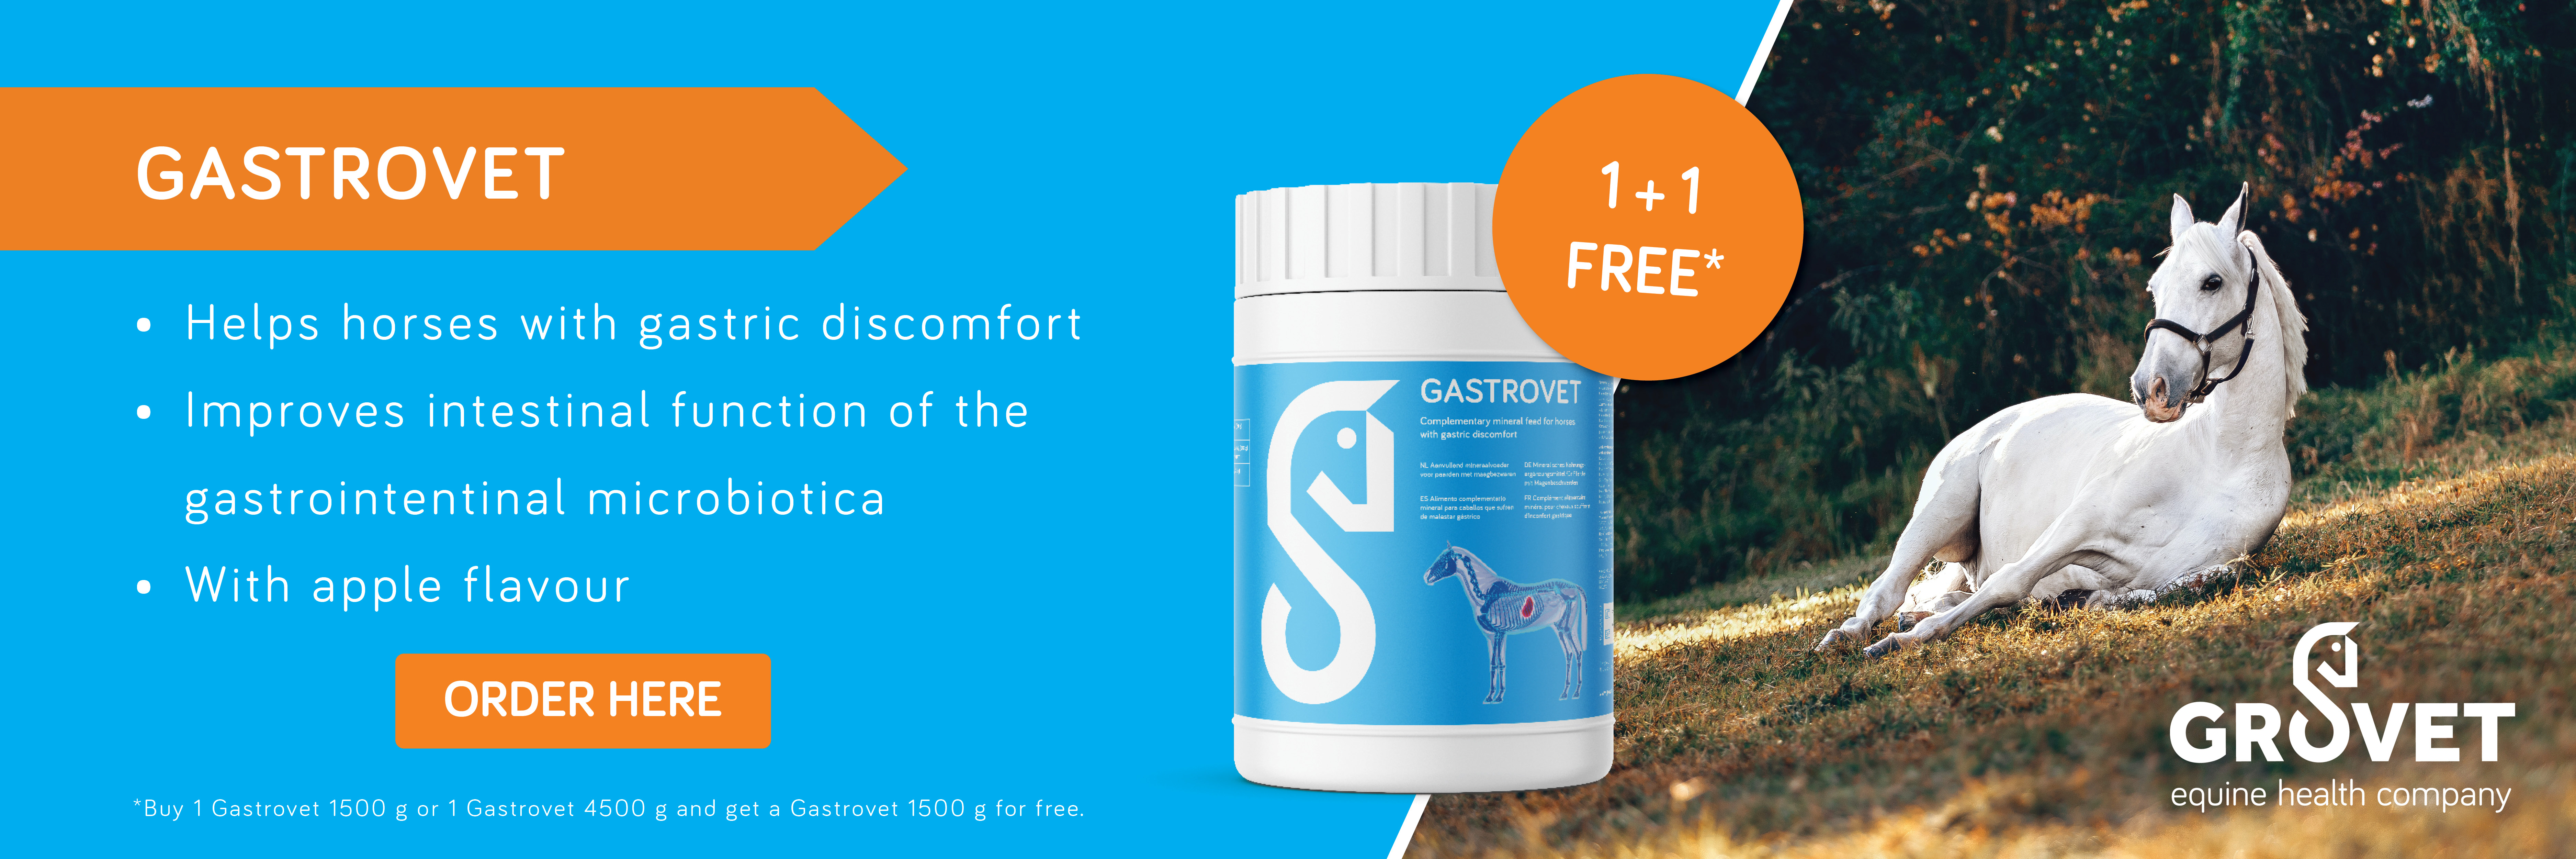 Free Gastrovet 1500 g with Gastrovet 1500 or 4500 g